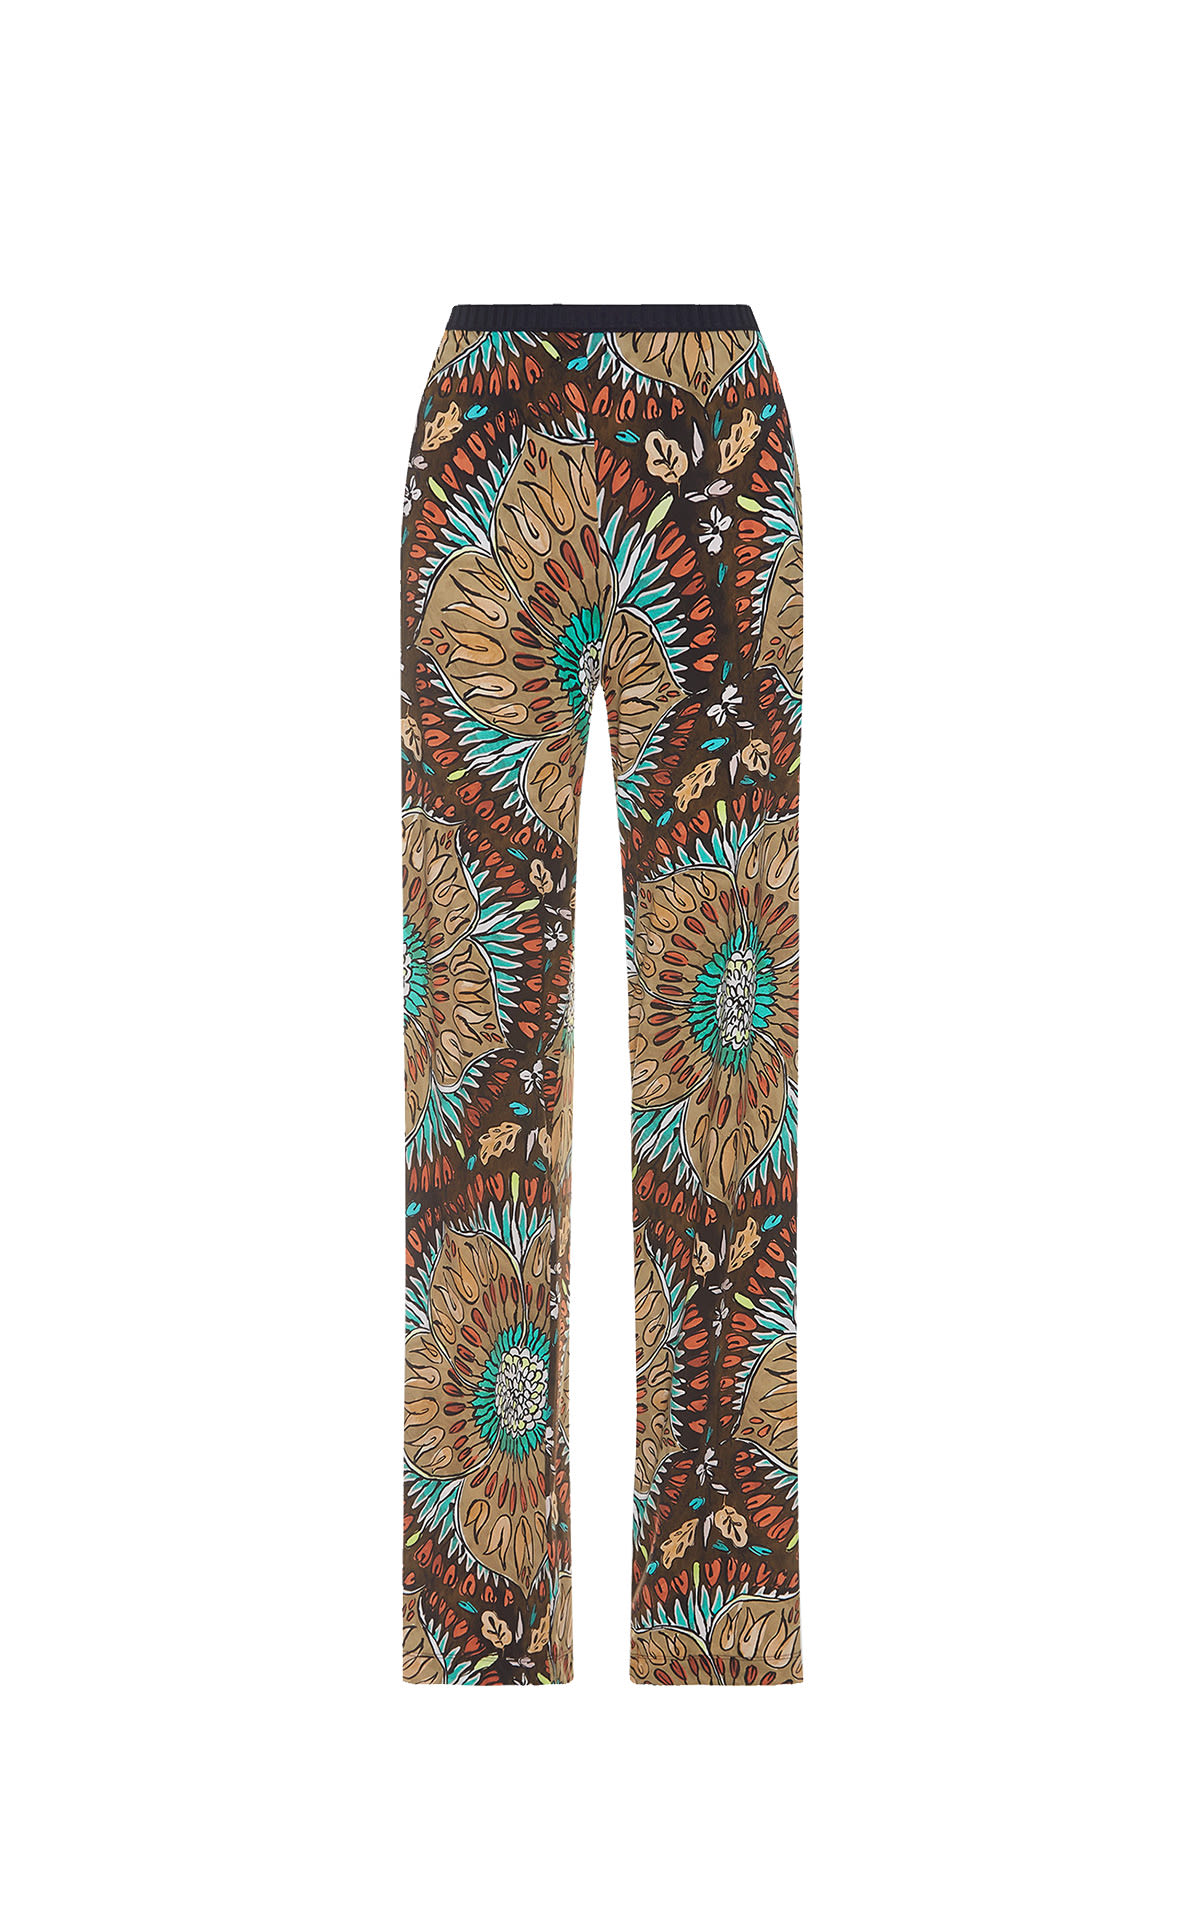 Printed jersey trousers